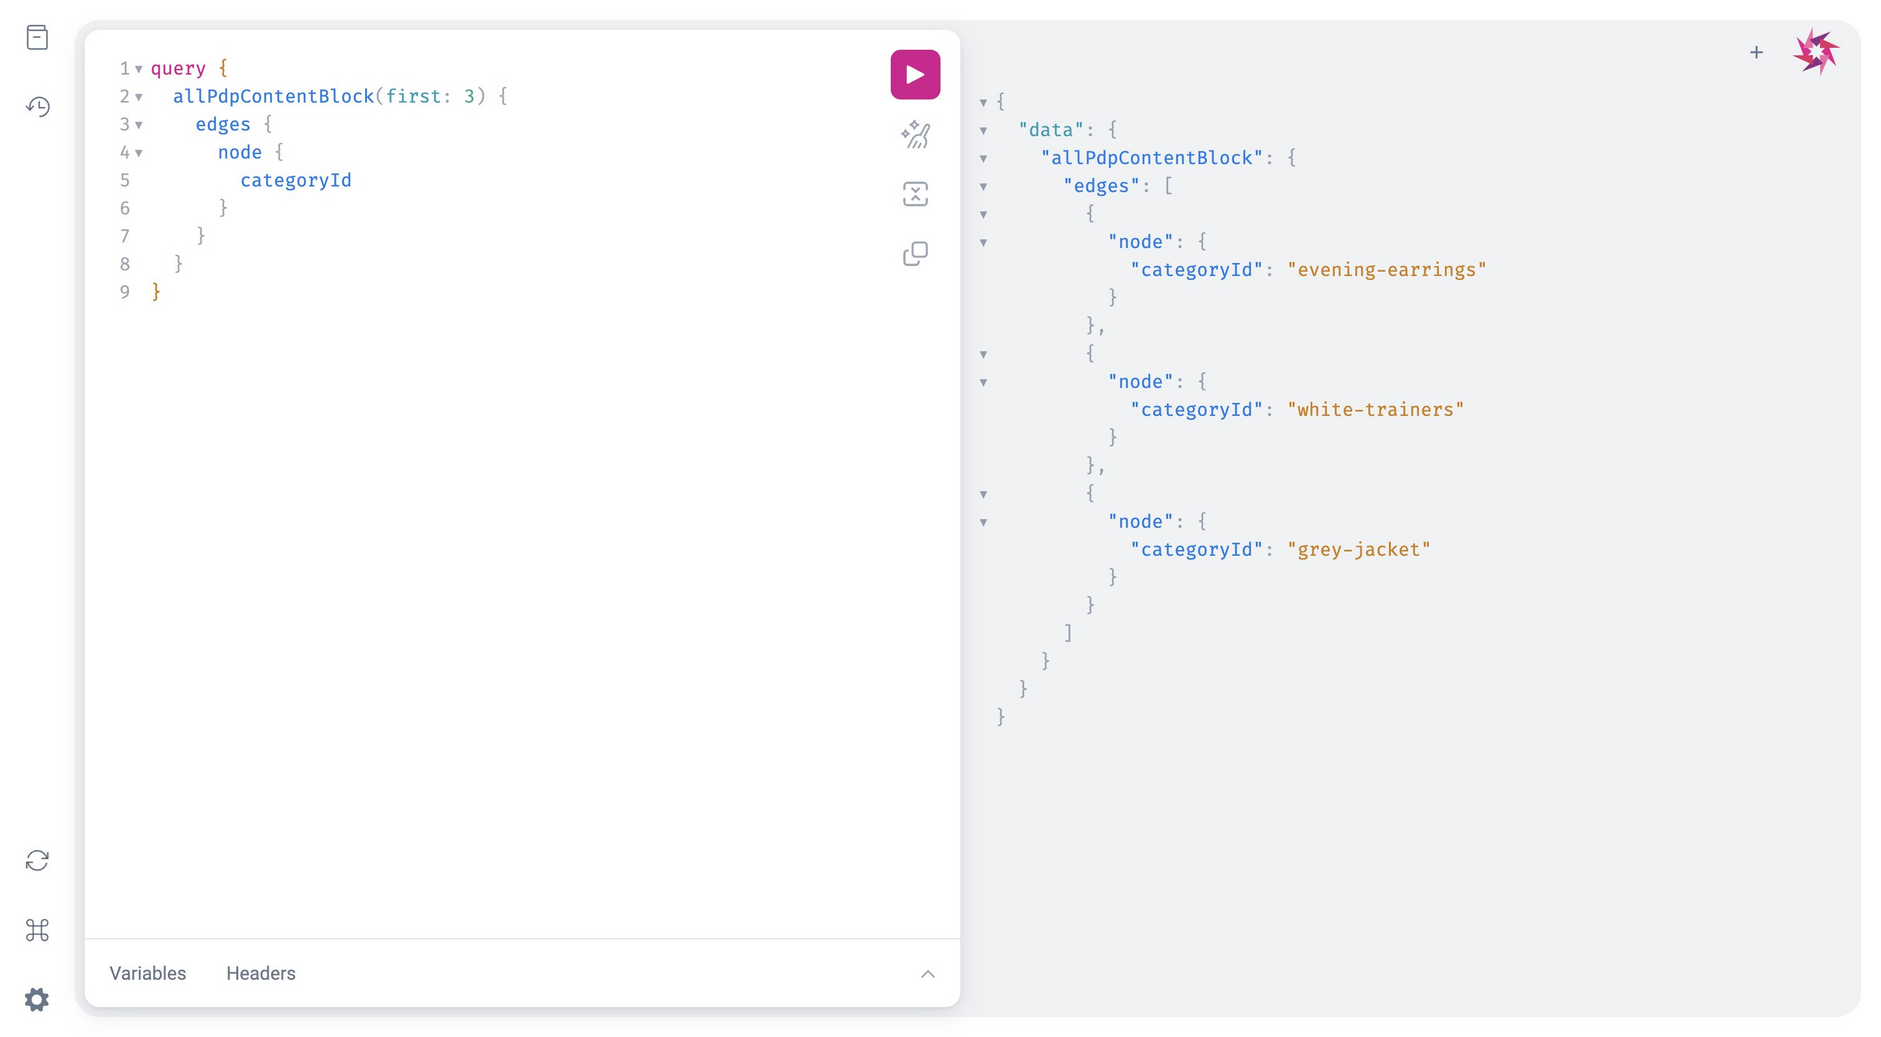 The GraphQL query and result